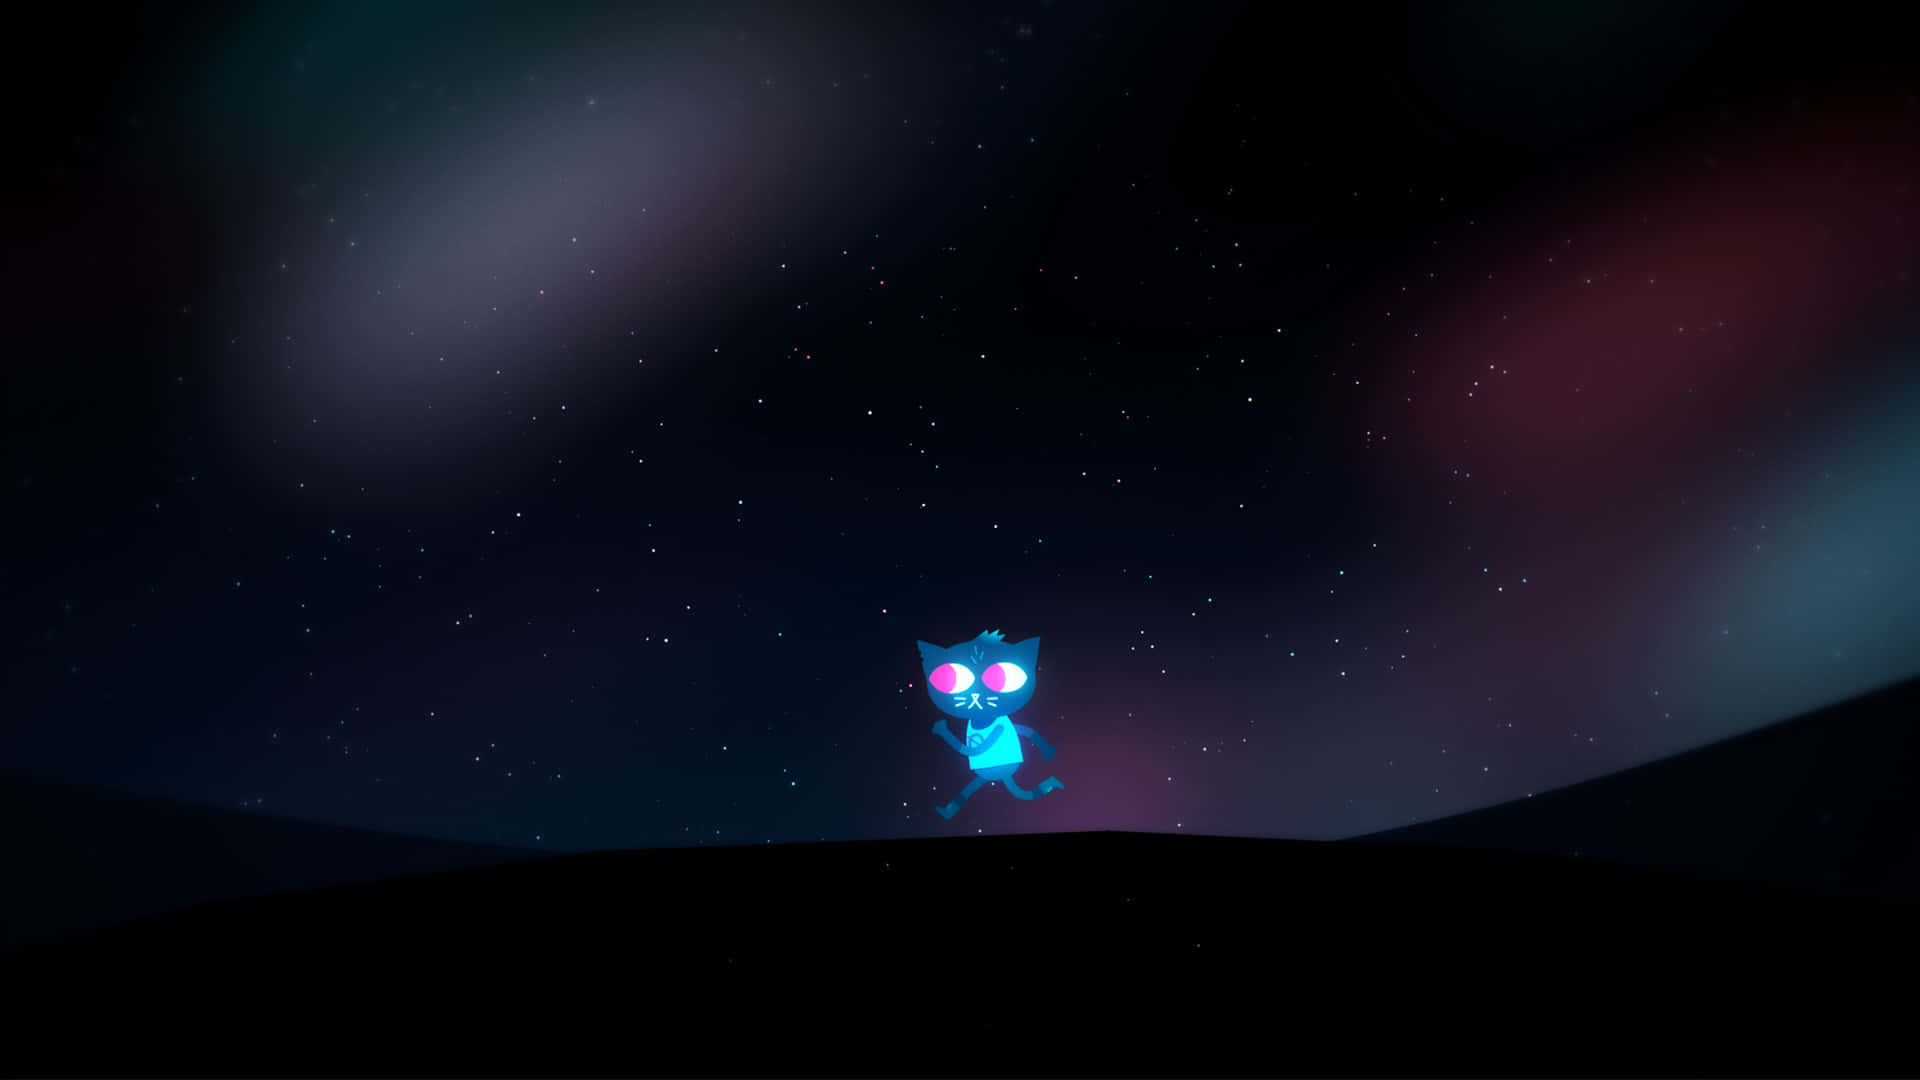 A Blue Cat Standing On A Hill With Stars In The Sky Wallpaper